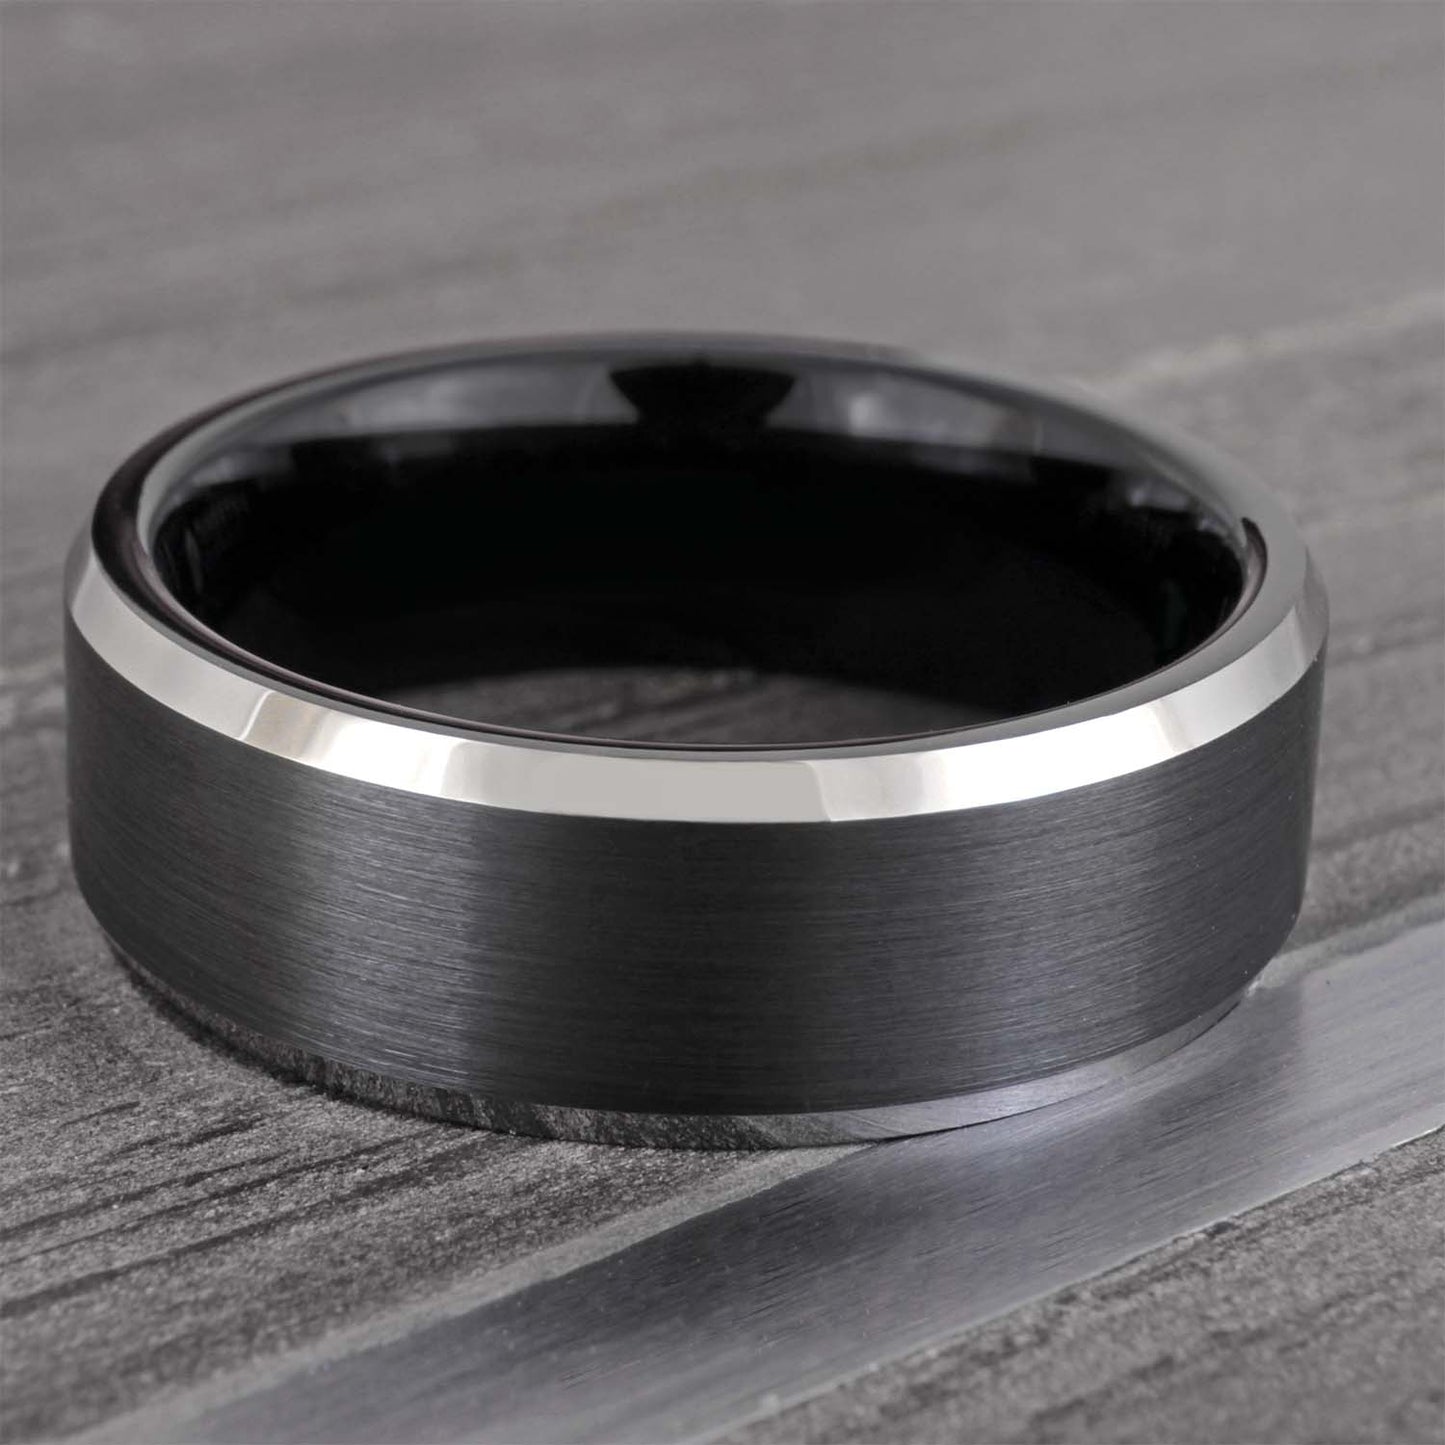 Black Tungsten Wedding Band with Contrasting Silver Edges